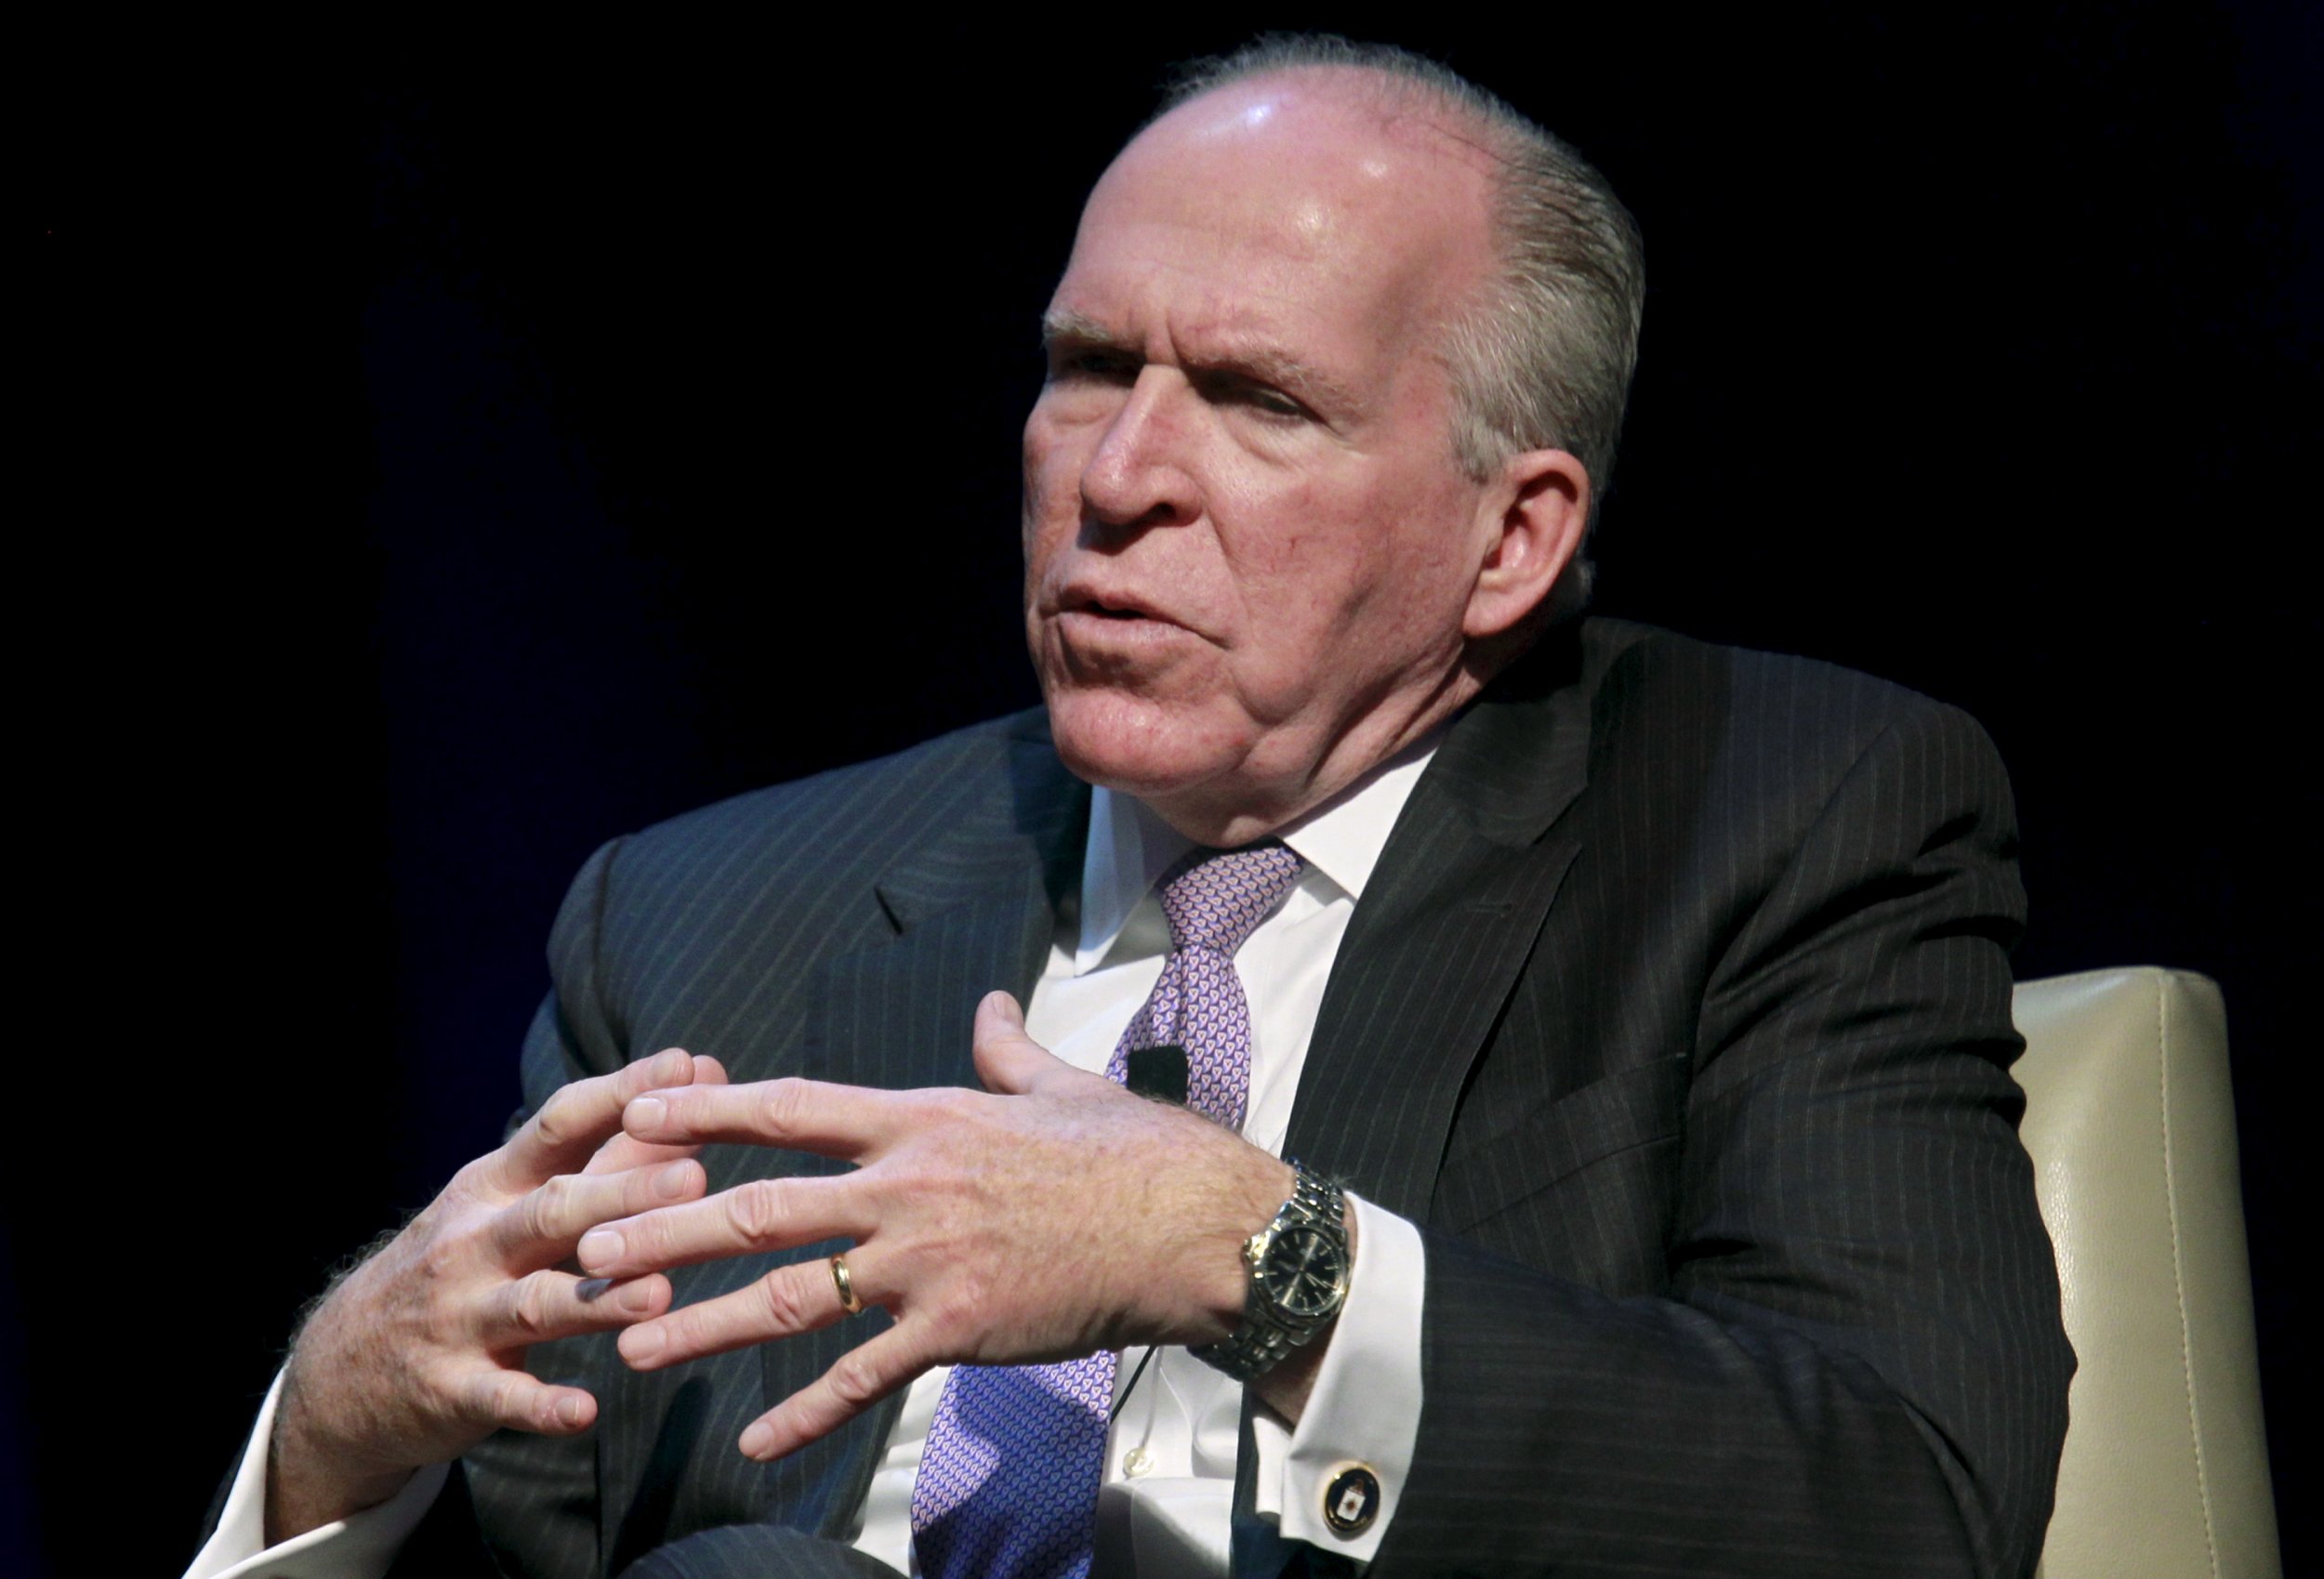 John Brennan speaks at a conference